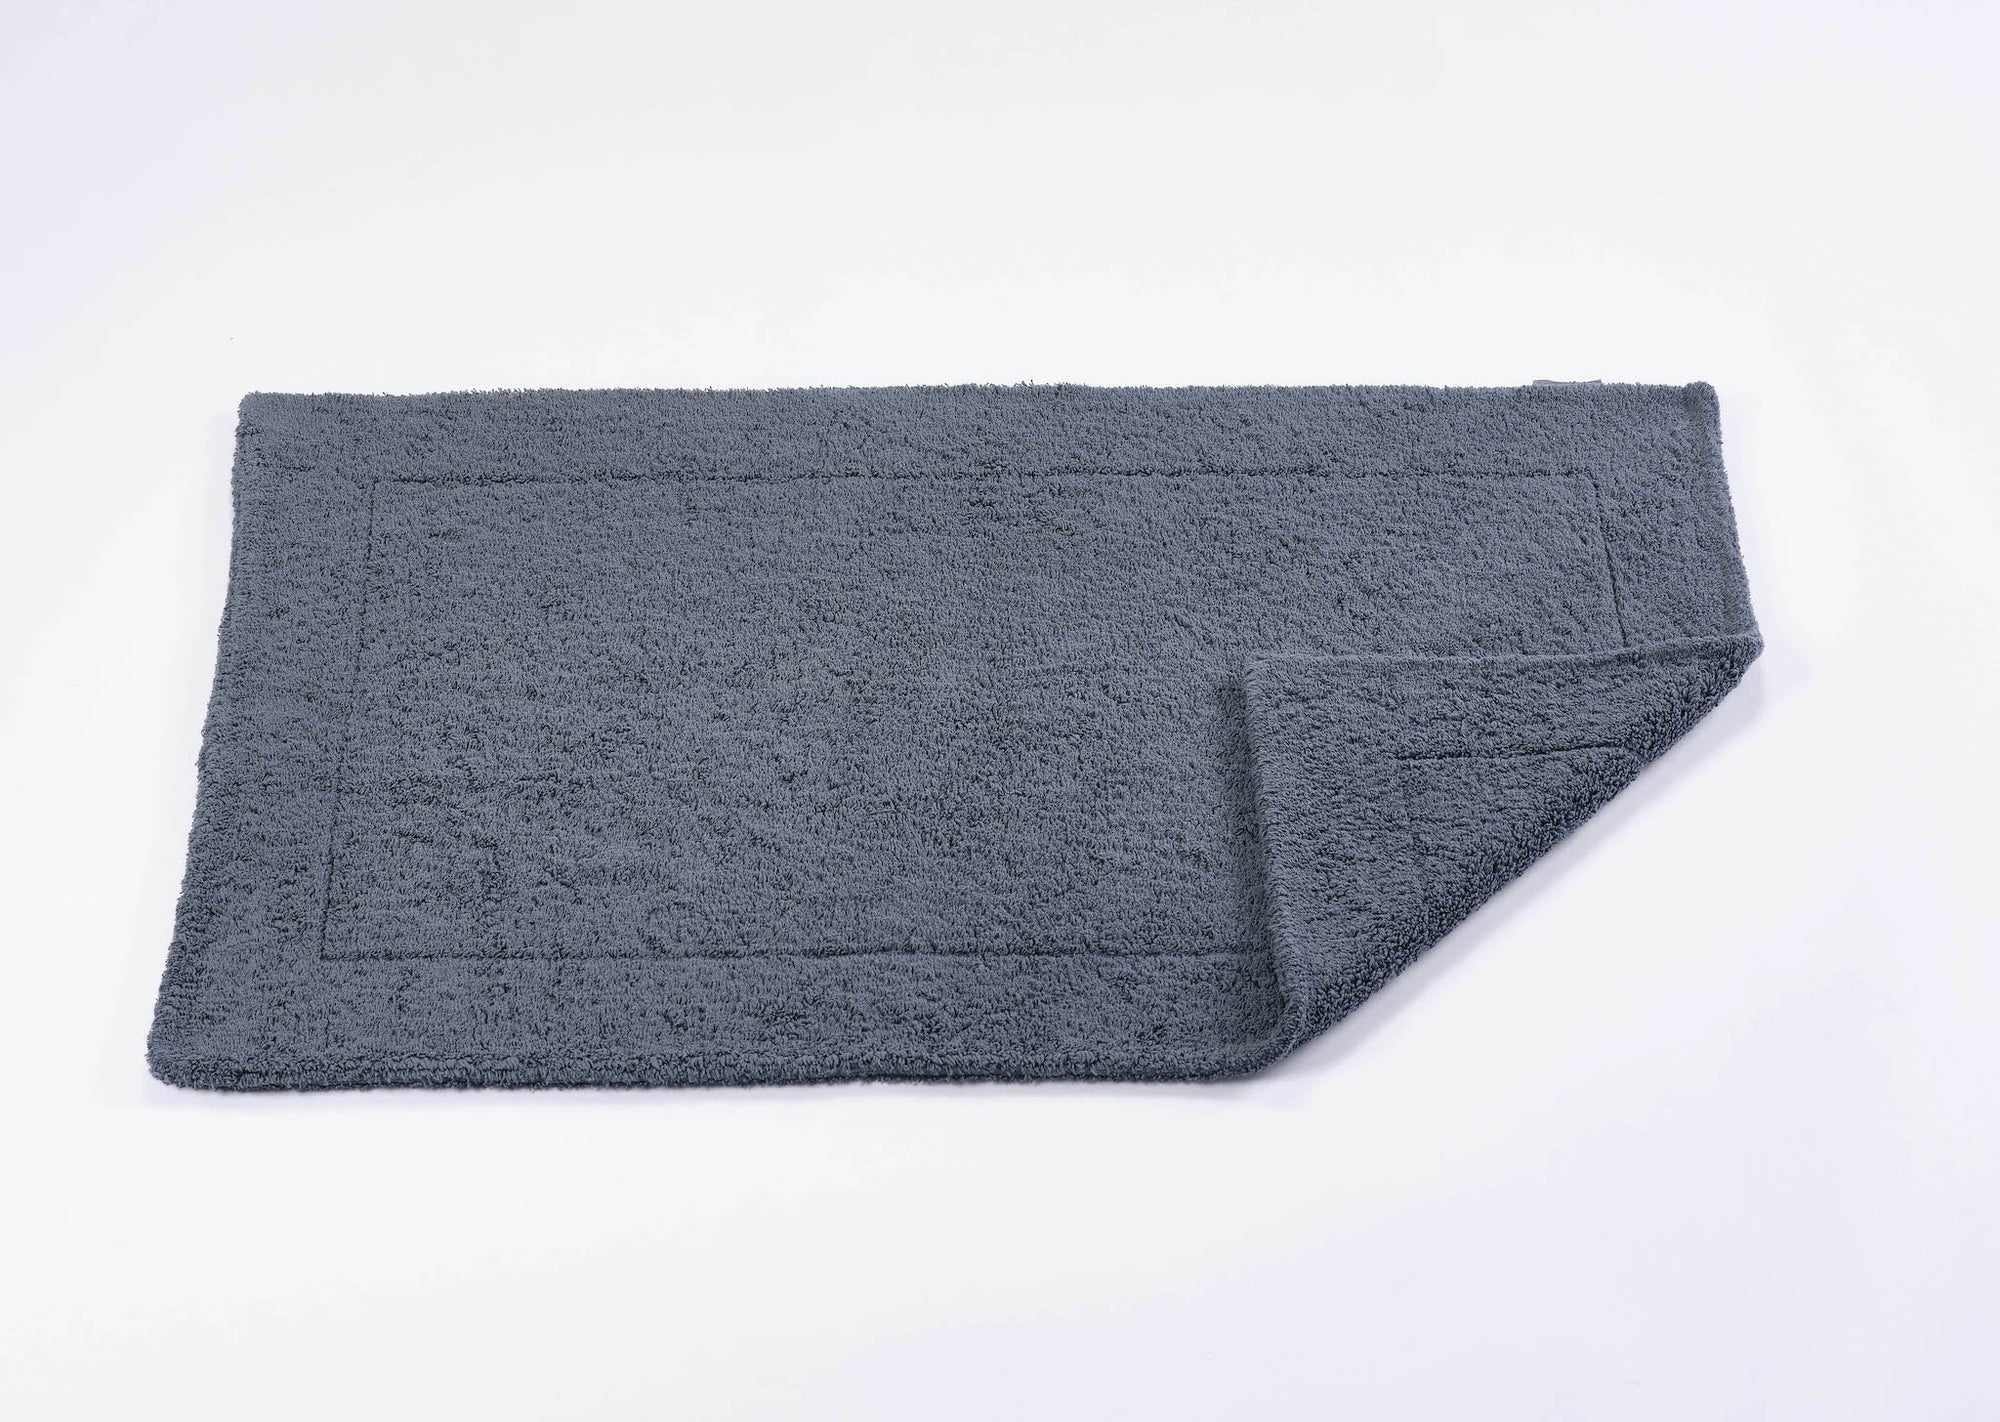 Fig Linens - Double Bath Mat 20x31 by Abyss and Habidecor -  Denim